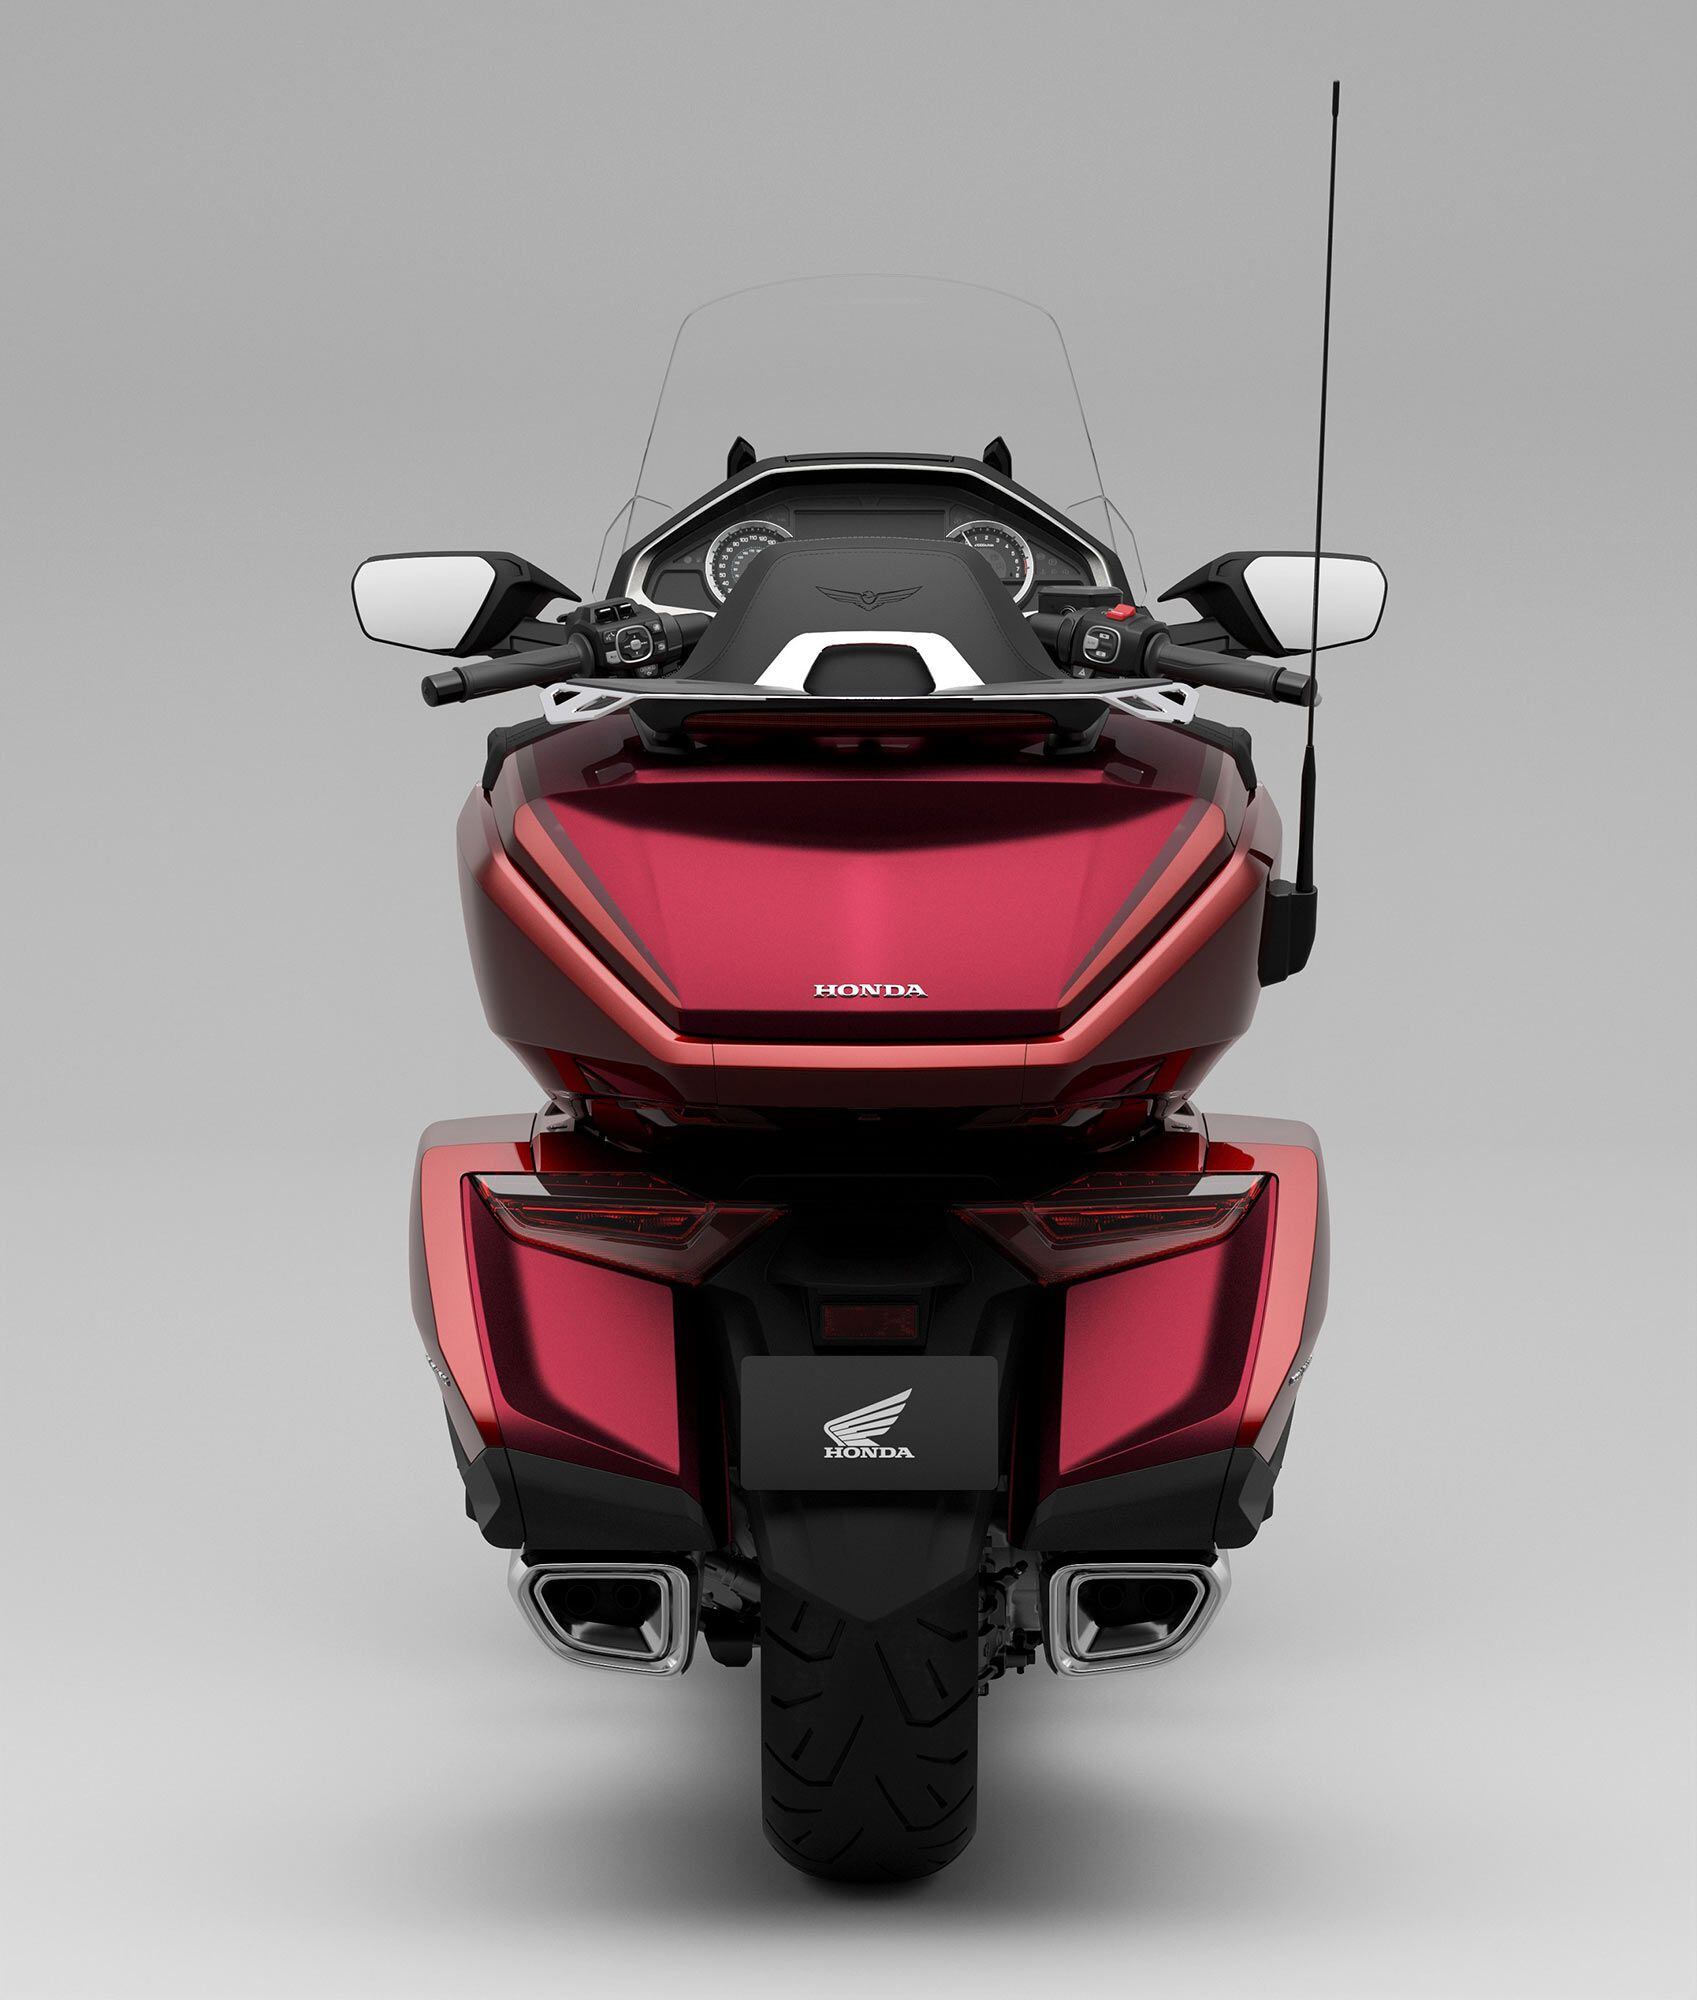 The top trunk on Gold Wing Tour versions was updated in 2021 to provide 61 liters of capacity, the trunk is said to be able to fit two XXL helmets.